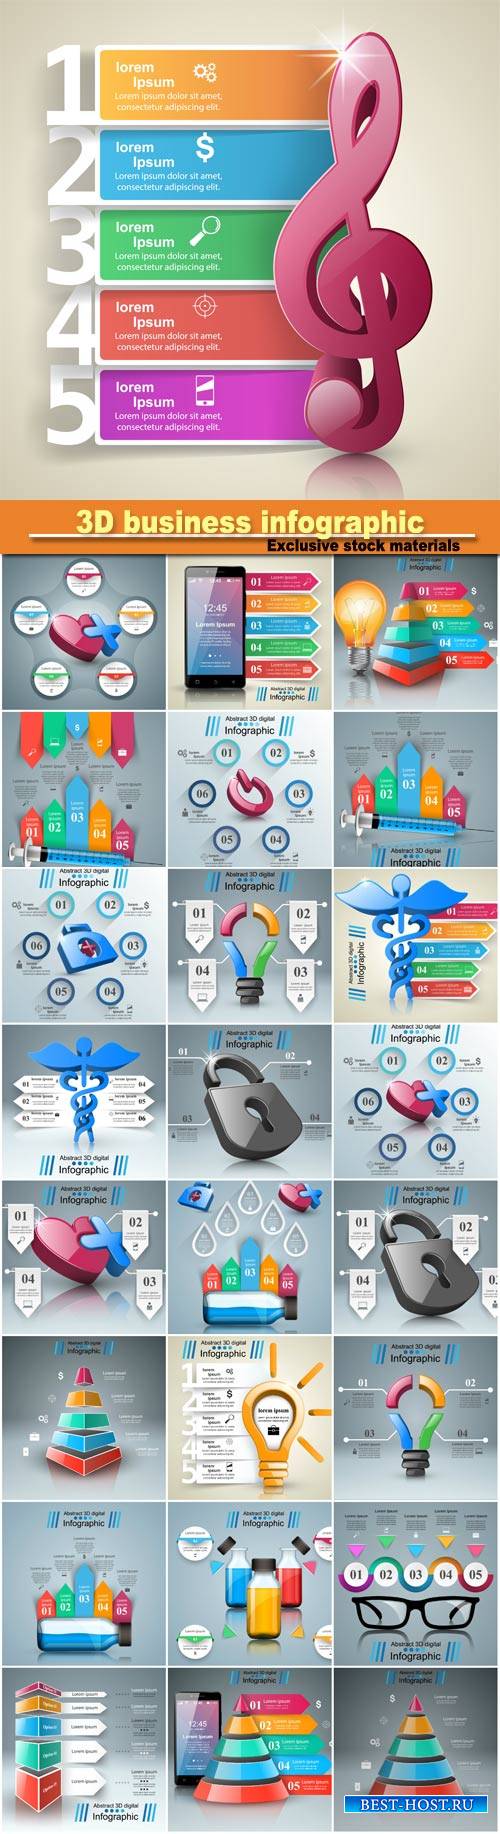 3D business infographic design template and marketing icons, vector illustr ...